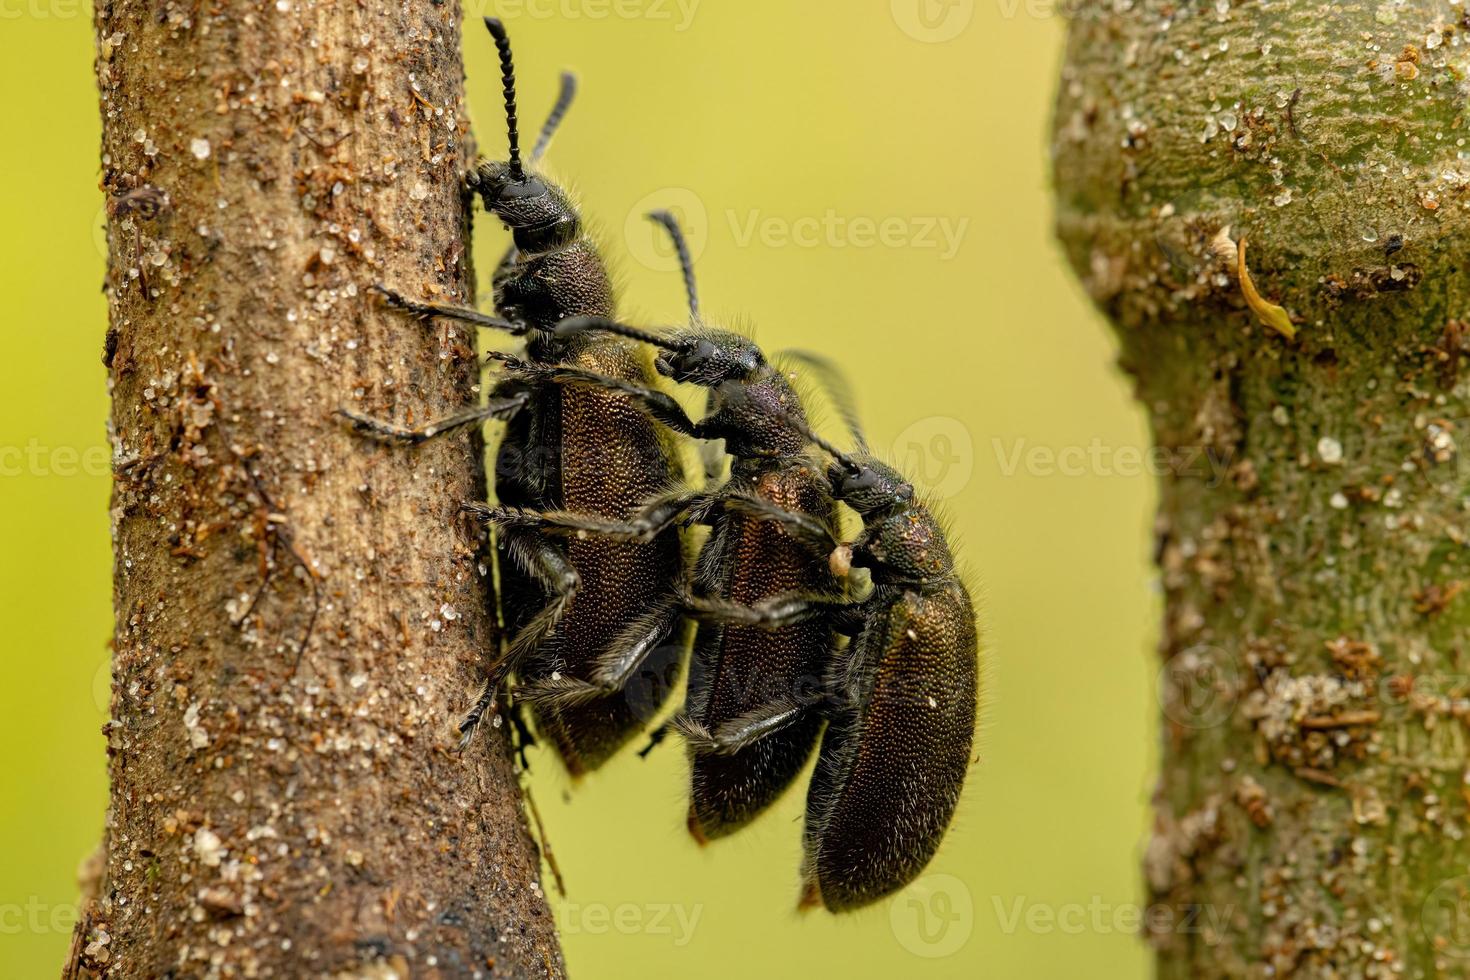 Adult Long-jointed Beetles photo